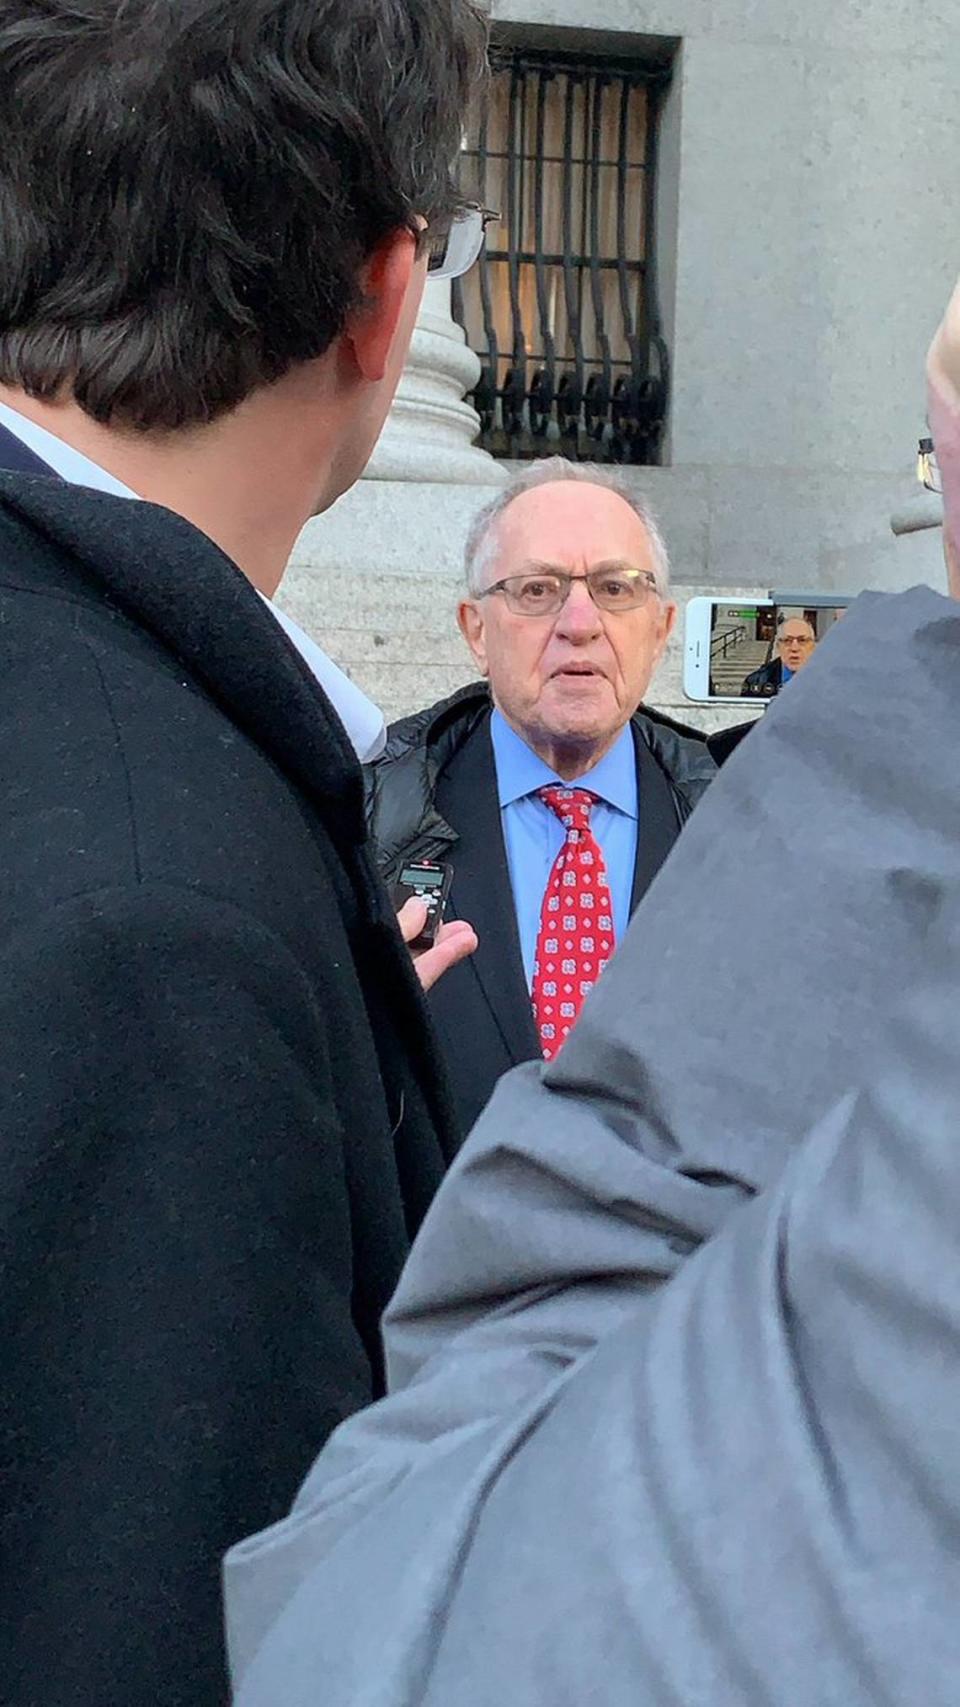 Famed First Amendment attorney Alan Dershowitz speaks outside the courtroom in New York after an earlier hearing on a sealed lawsuit involving his friend and former client, Jeffrey Epstein.